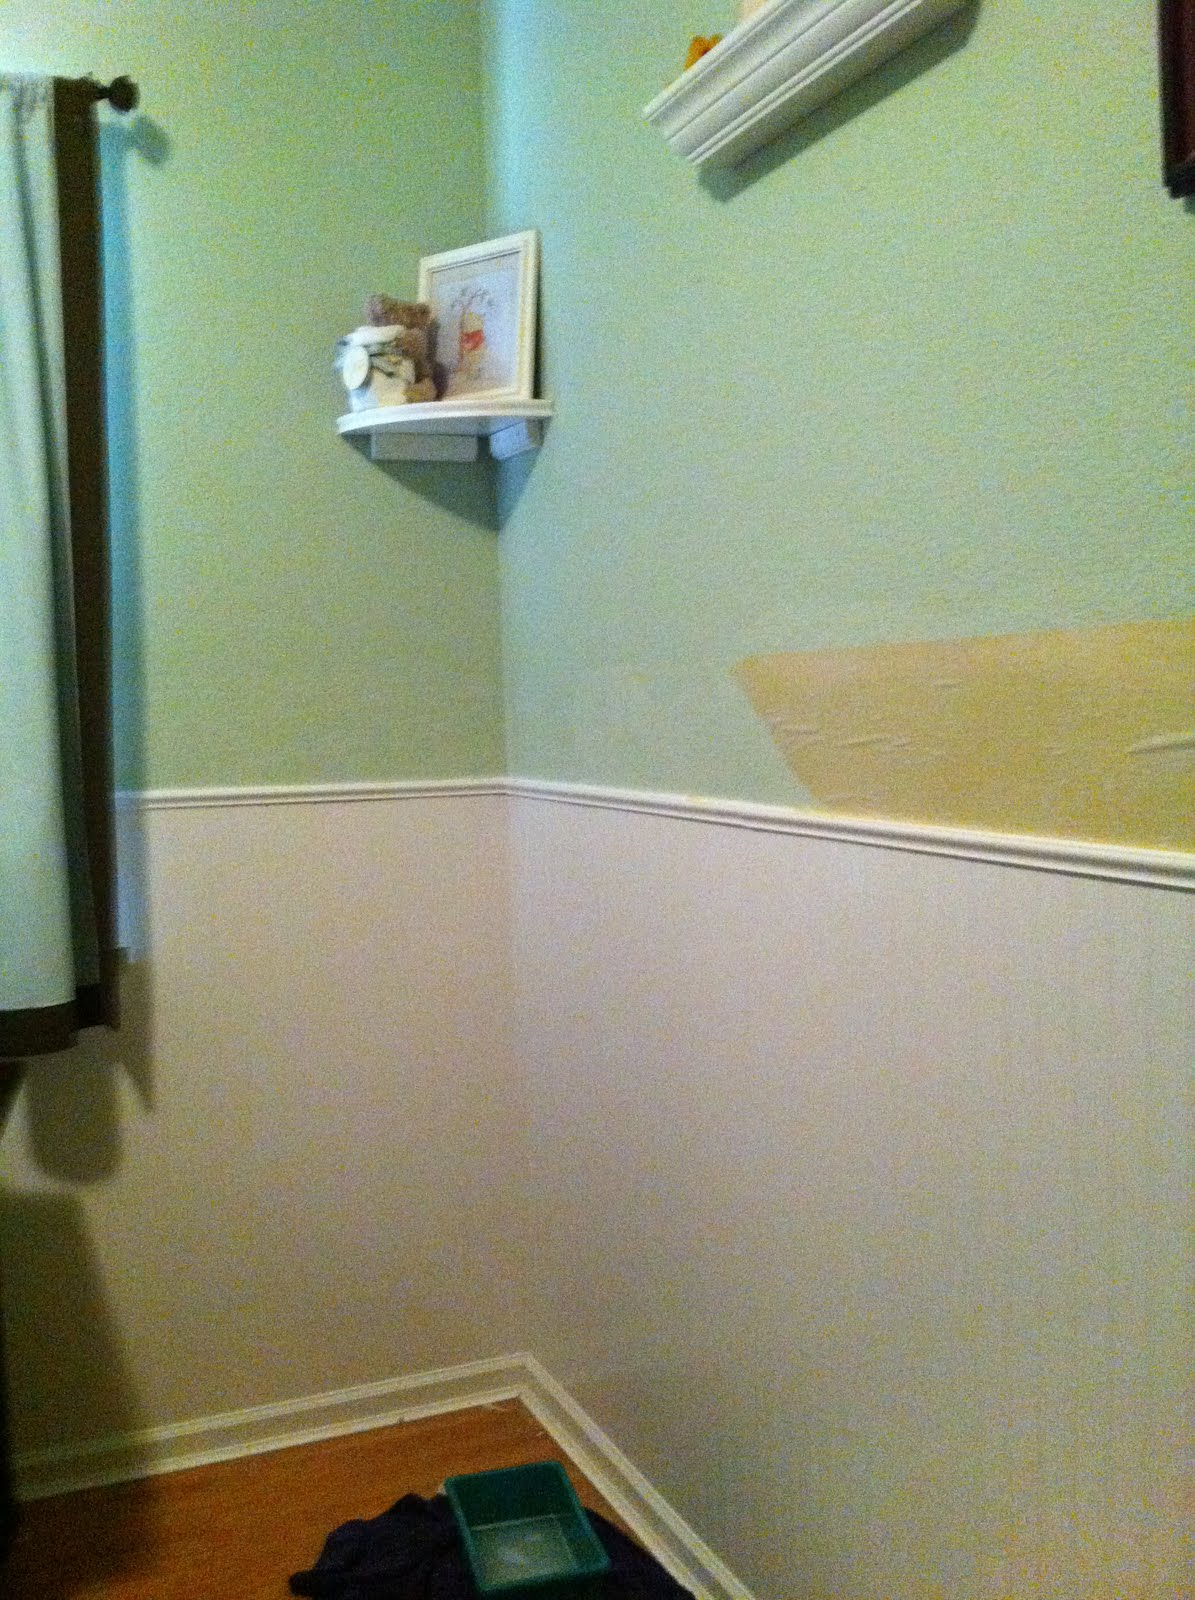 And It Came Out Wallpaper That Looks Like Wainscoting